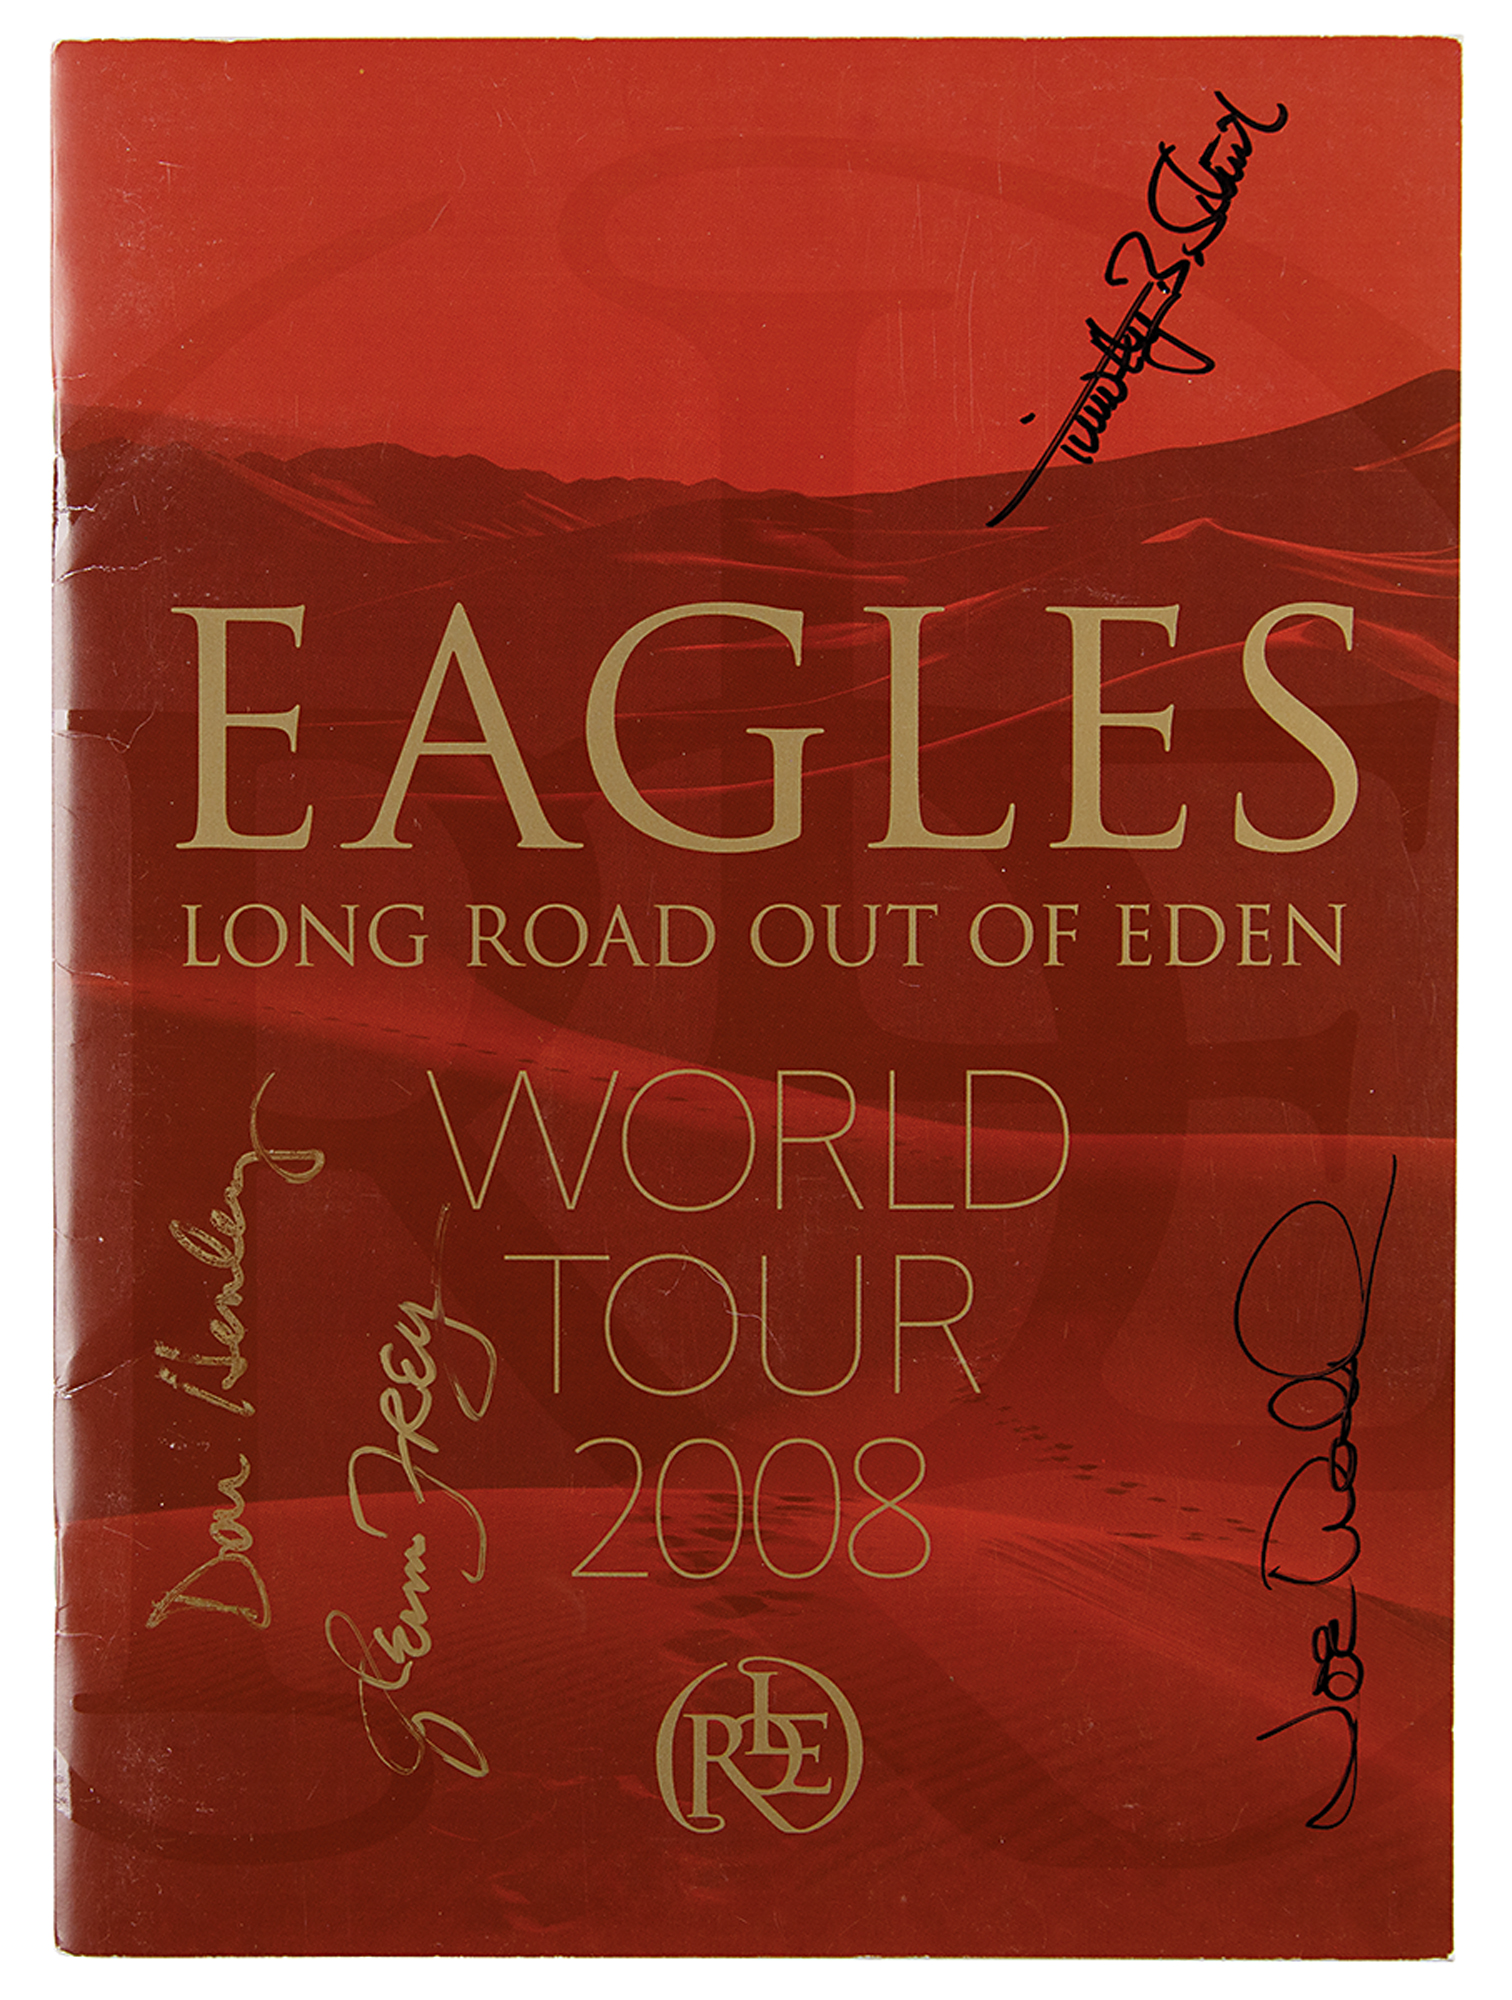 Lot #2236 Eagles Signed 2008 'Long Road Out of Eden' Tour Book